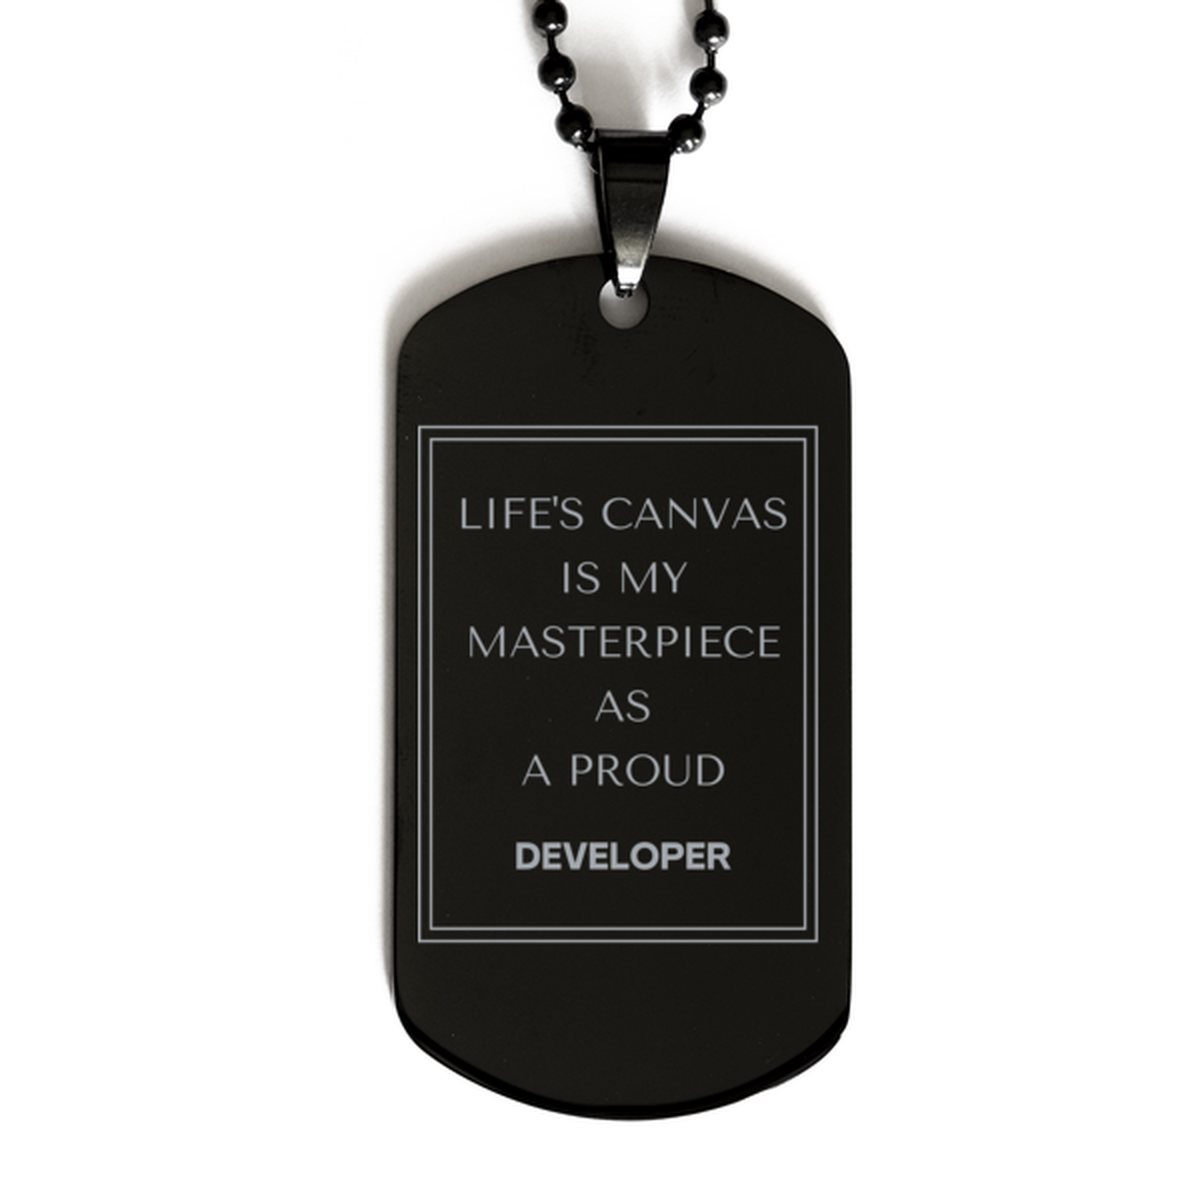 Proud Developer Gifts, Life's canvas is my masterpiece, Epic Birthday Christmas Unique Black Dog Tag For Developer, Coworkers, Men, Women, Friends